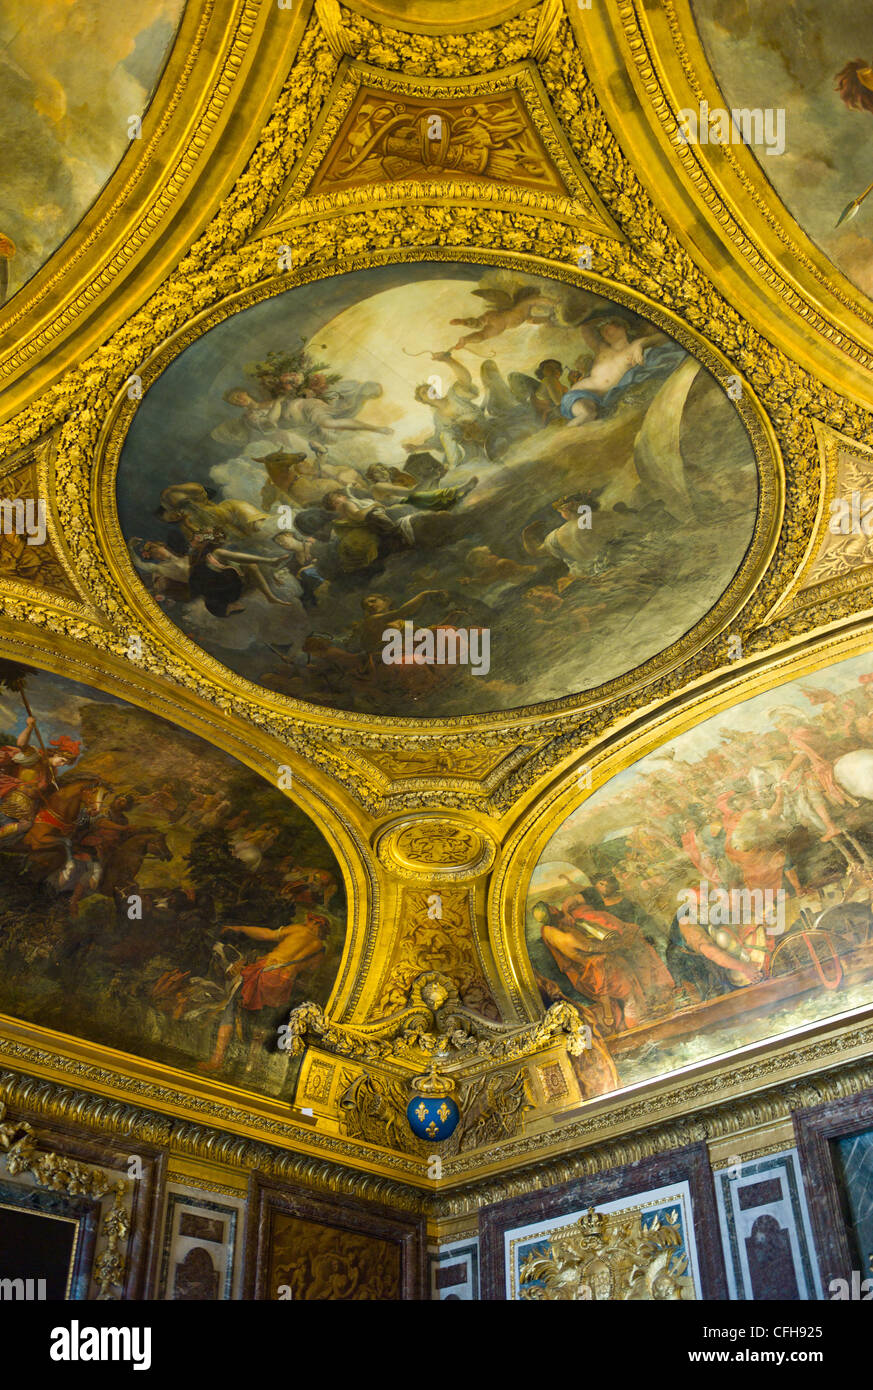 France, Chateau de Versailles, ceiling of the interior halls Stock Photo